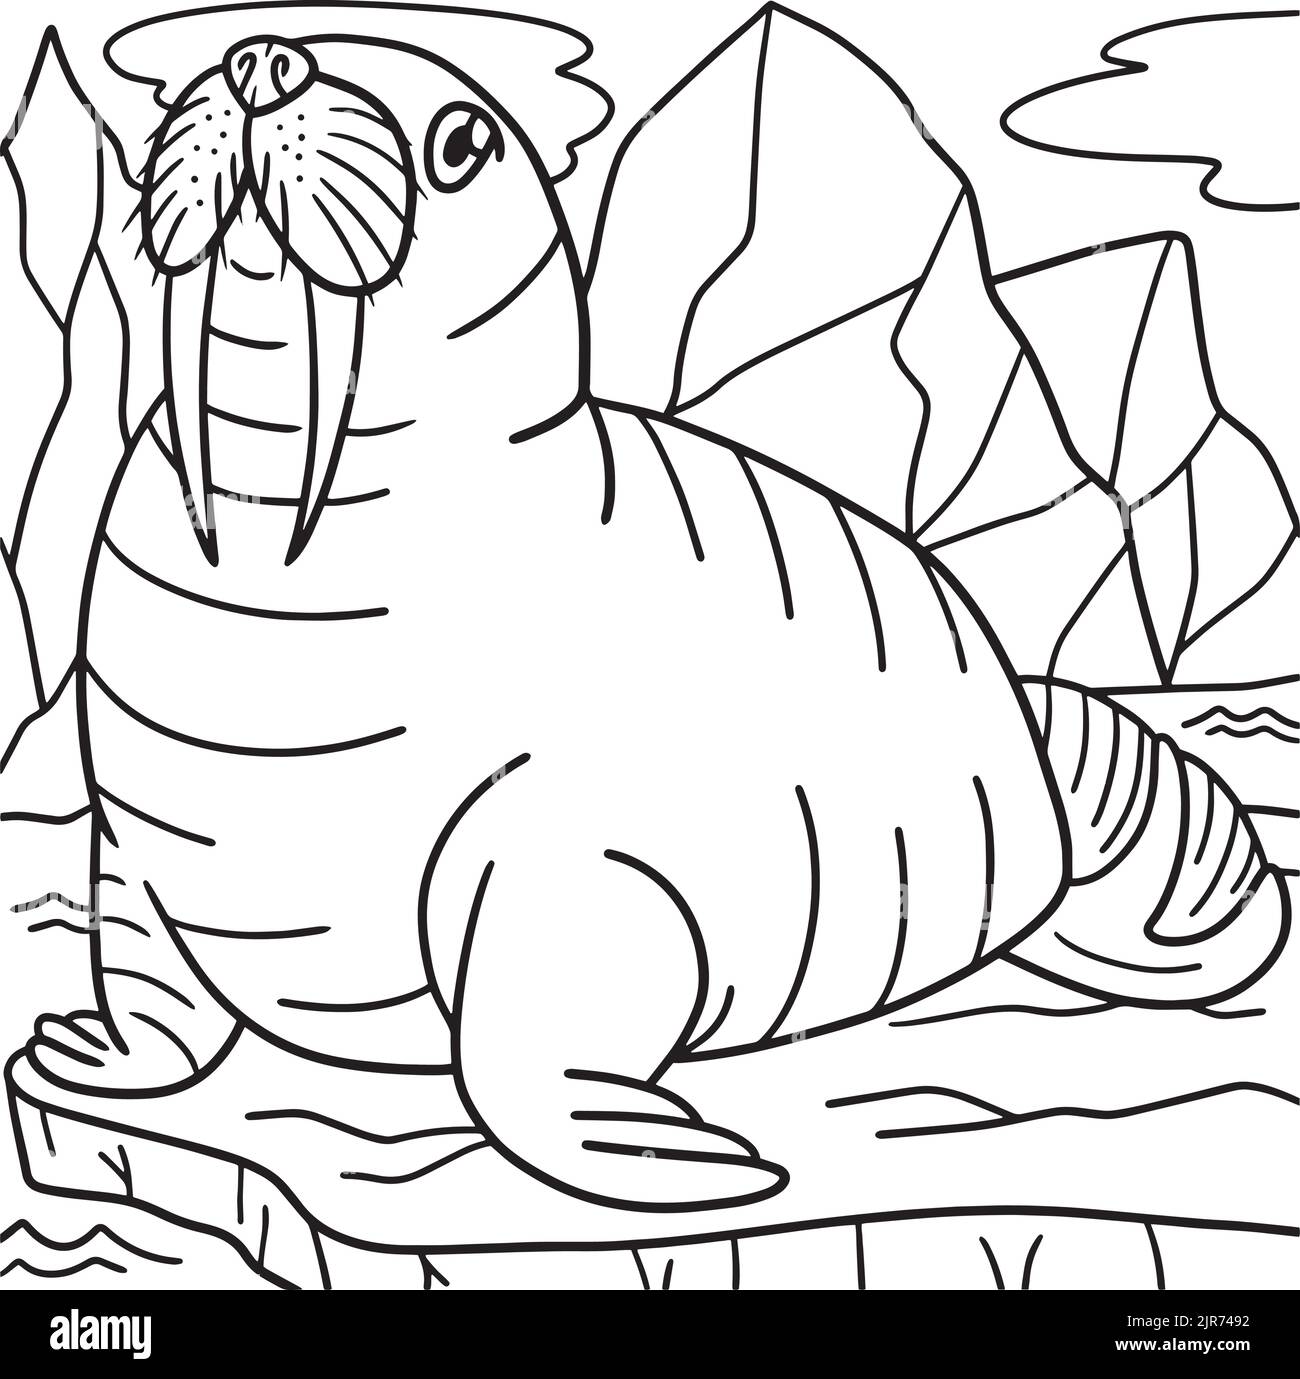 Walrus Coloring Page for Kids Stock Vector